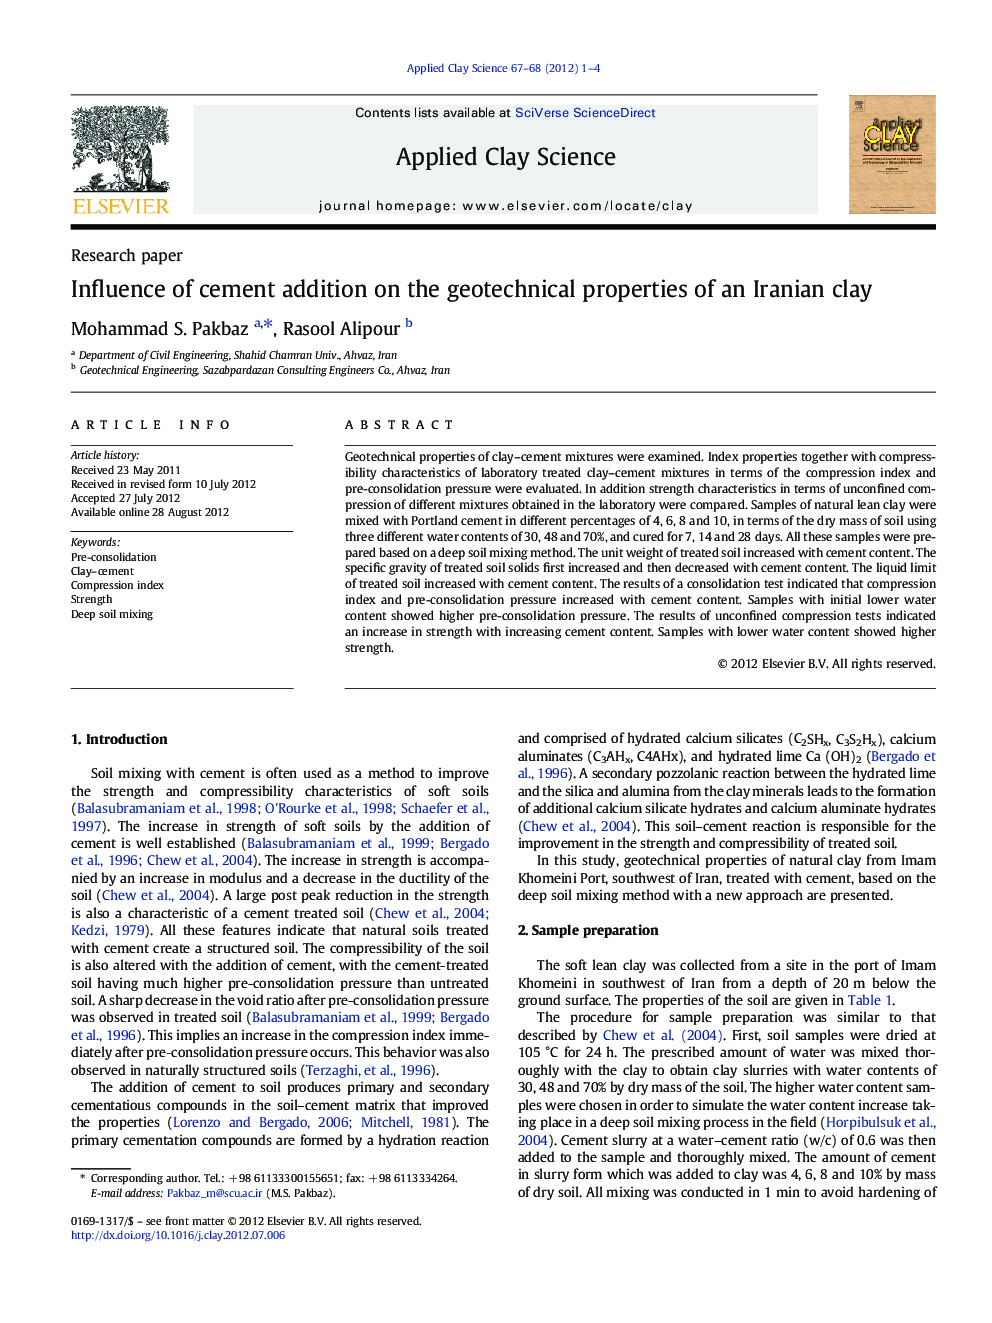 Influence of cement addition on the geotechnical properties of an Iranian clay